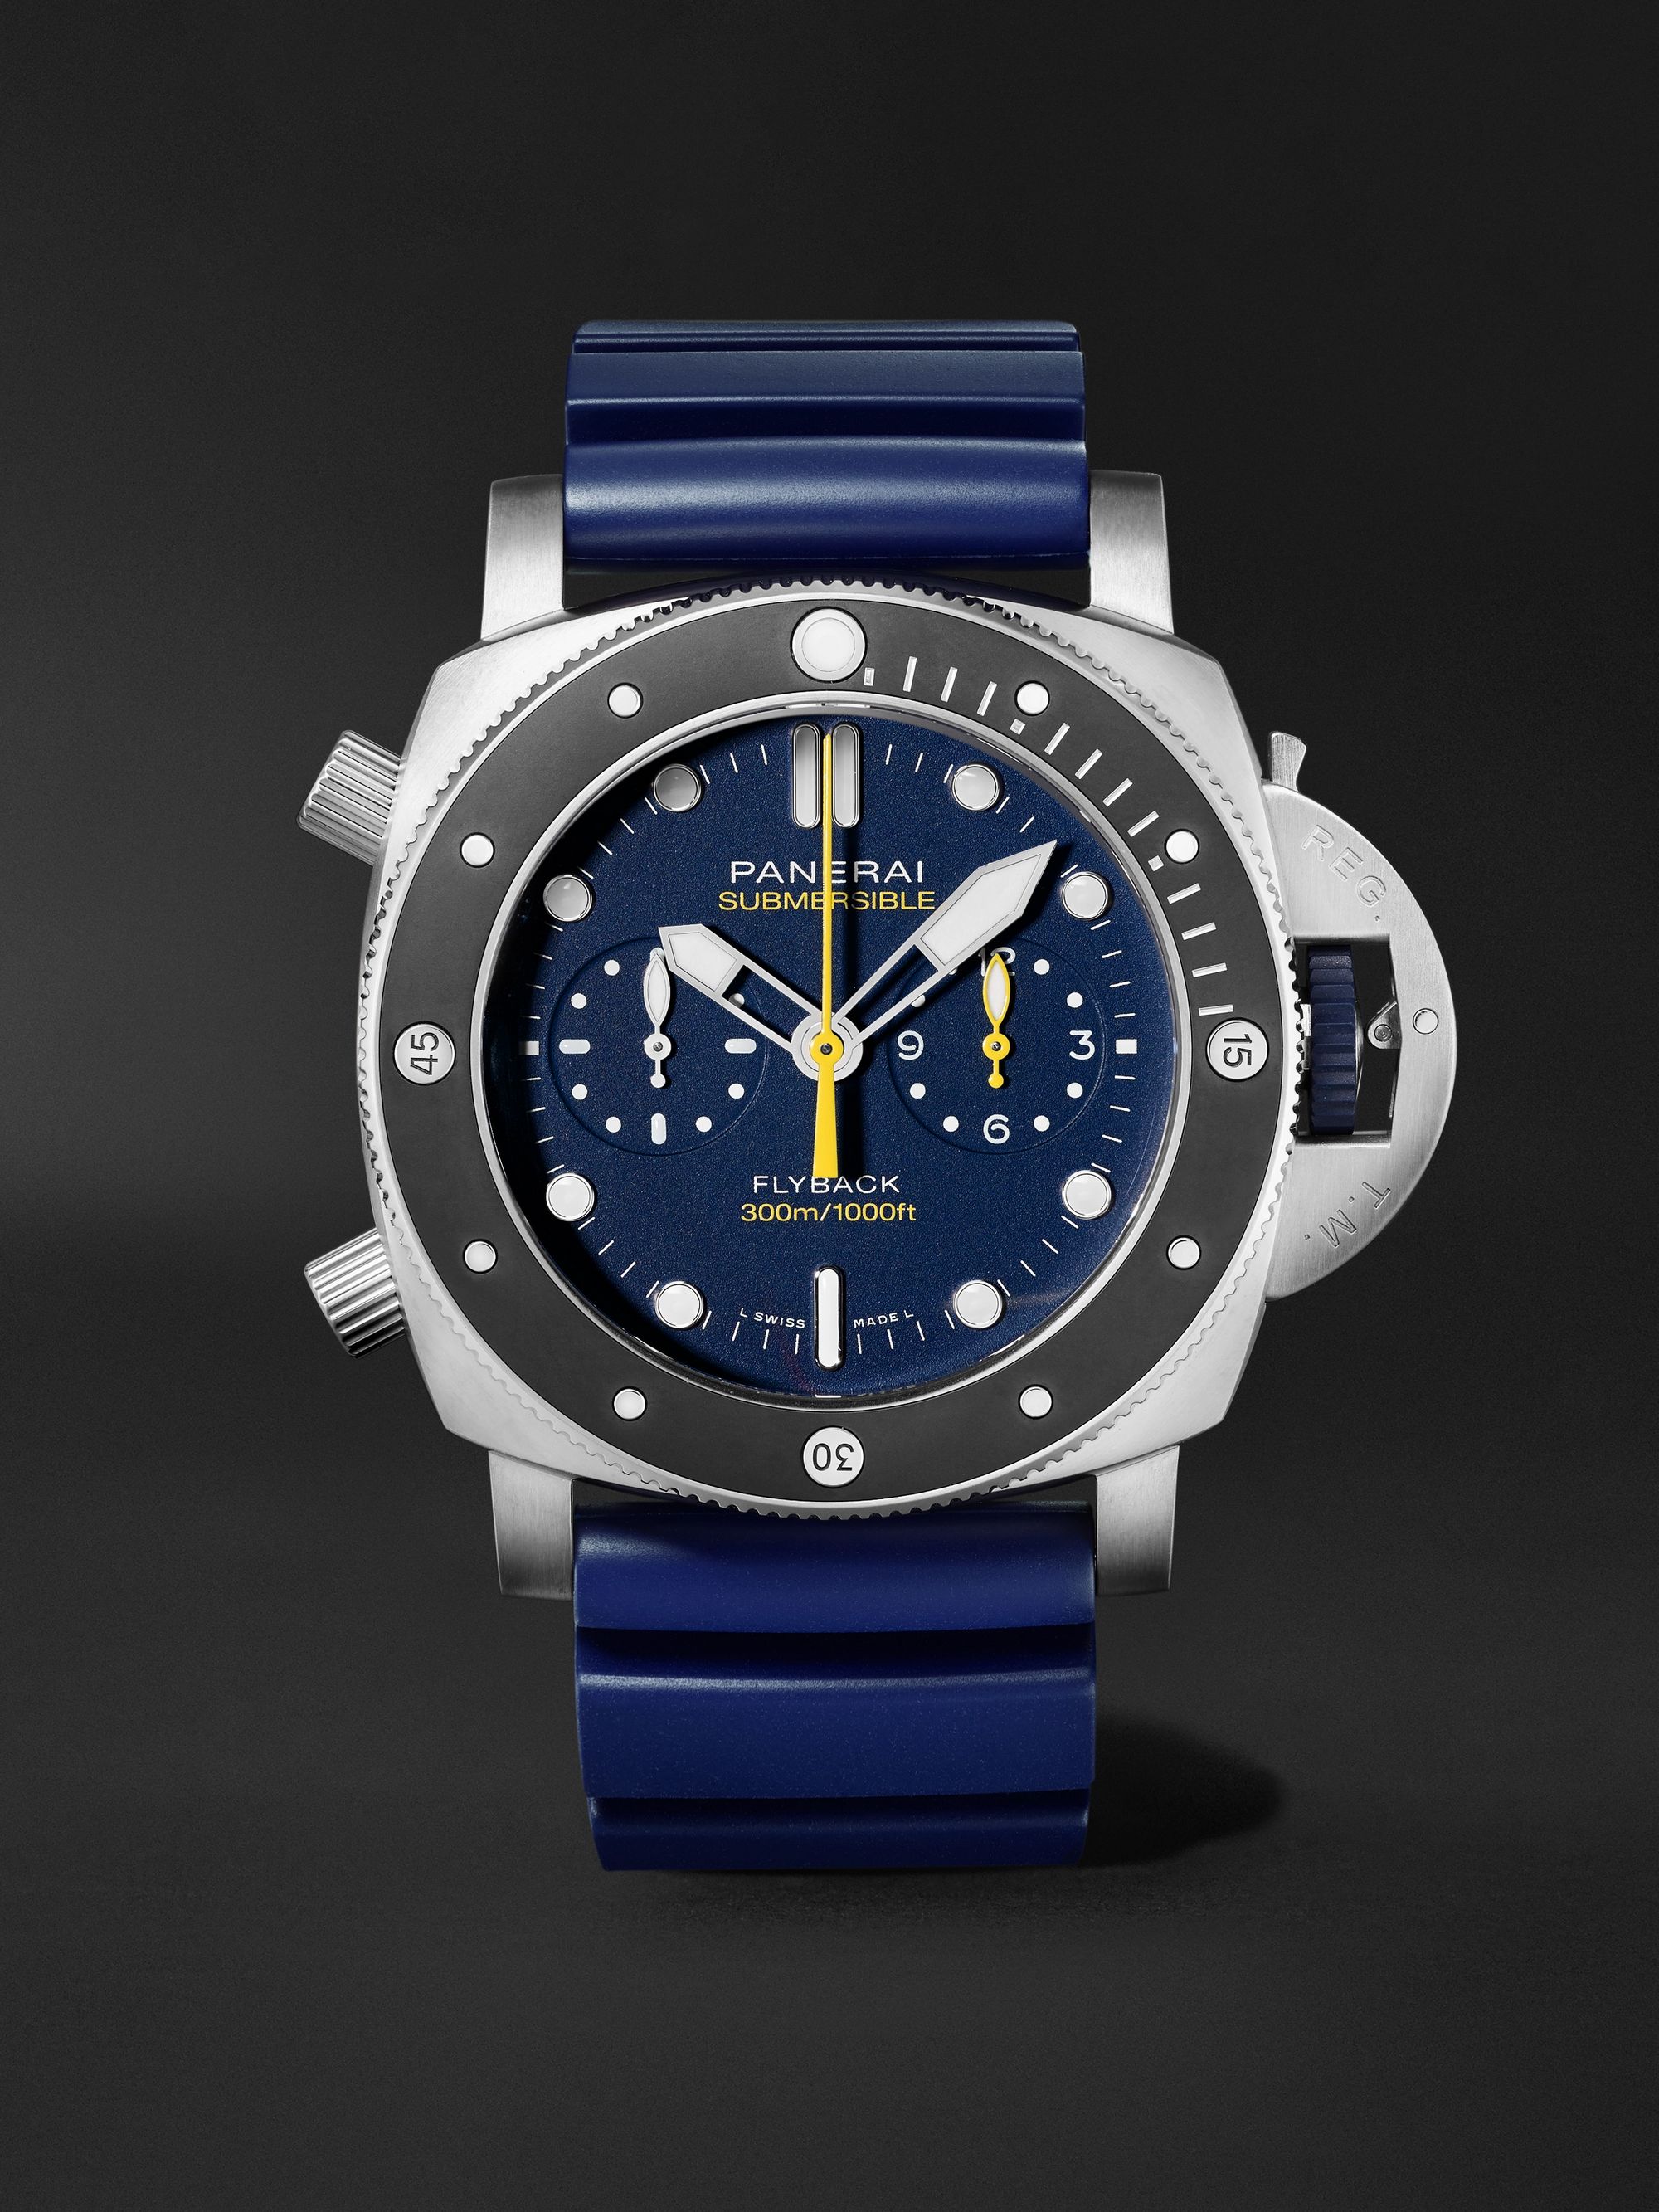 PANERAI Submersible Mike Horn Limited Edition Automatic Flyback Chronograph 47mm Titanium and Rubber Watch, Ref. No. PAM01291